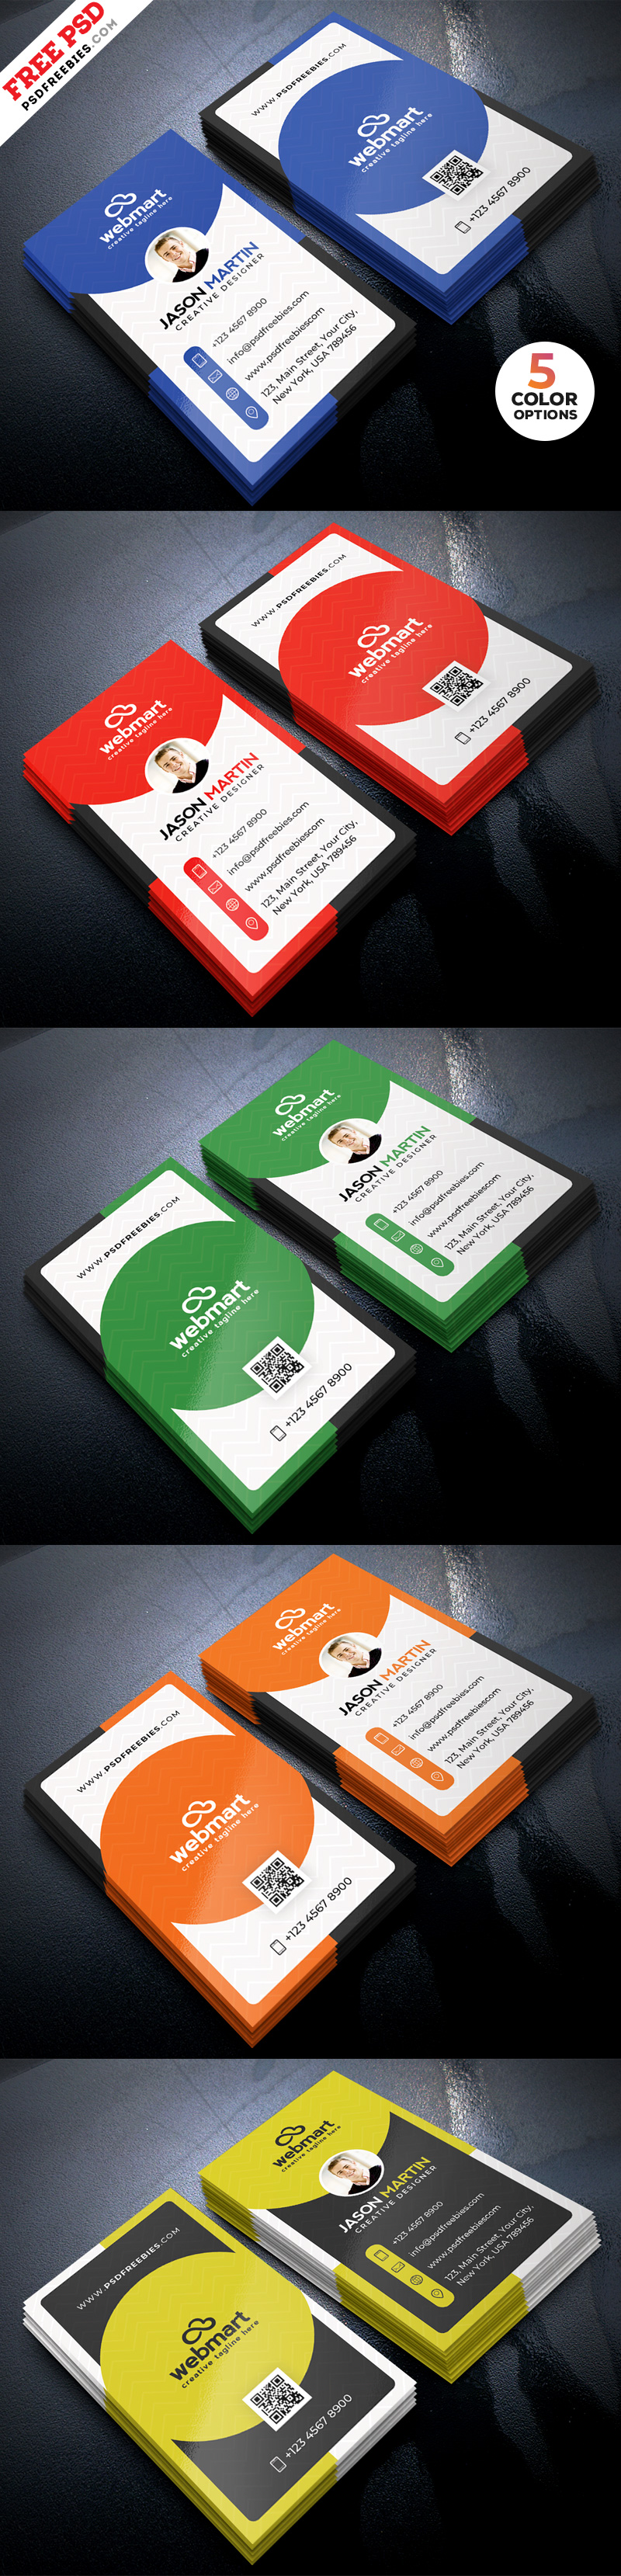 Creative and Clean Business Card PSD